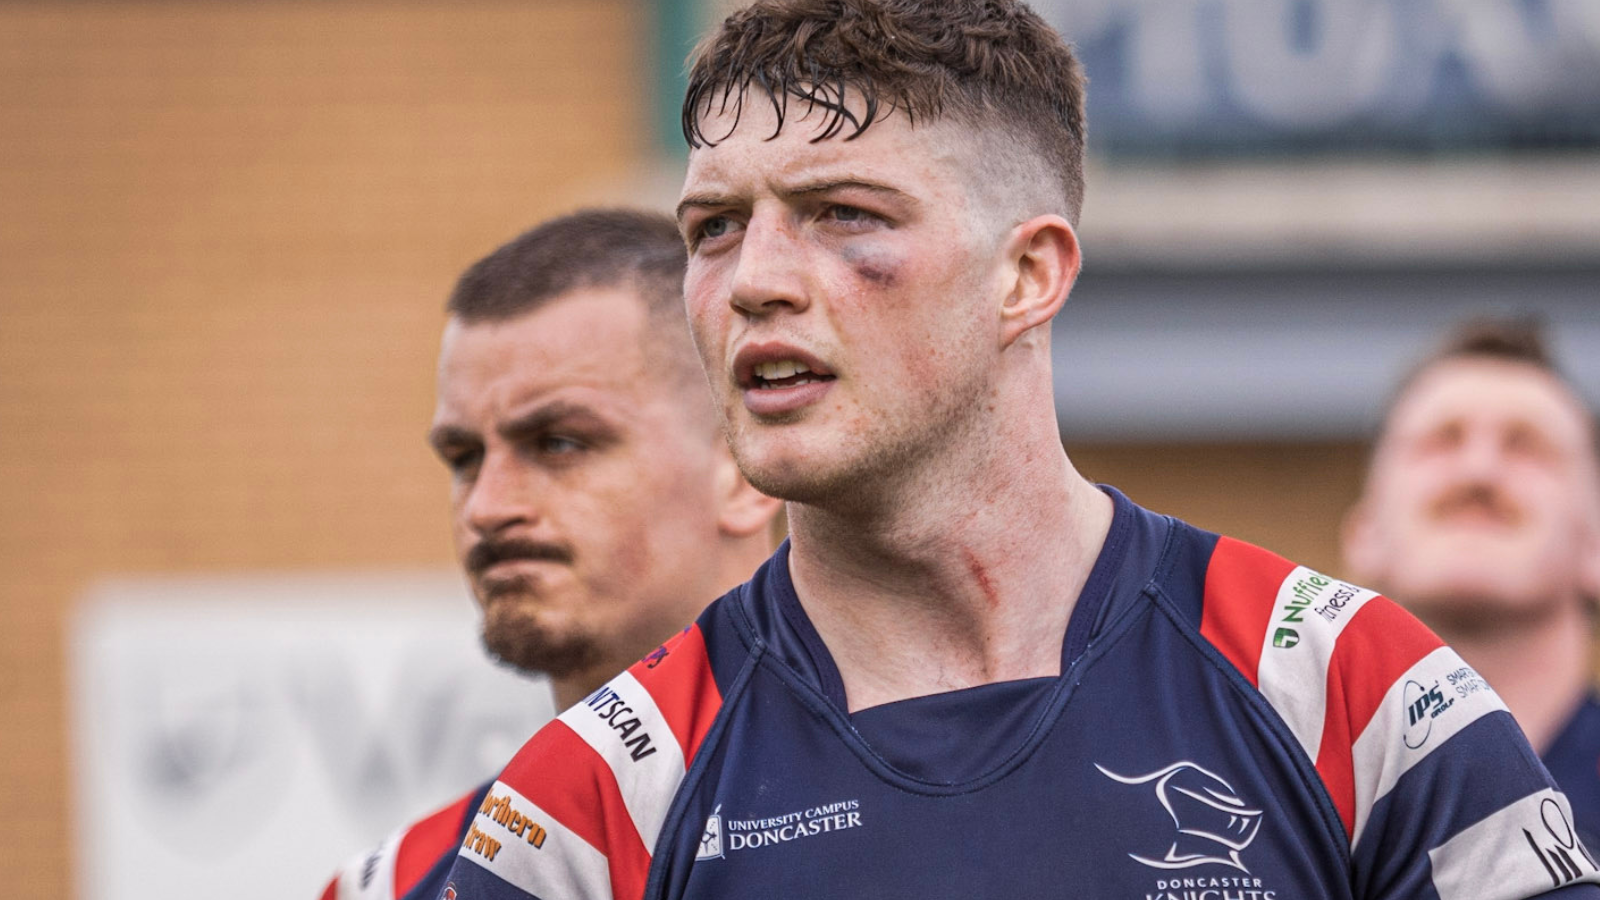 Thom Smith in action for Doncaster Knights